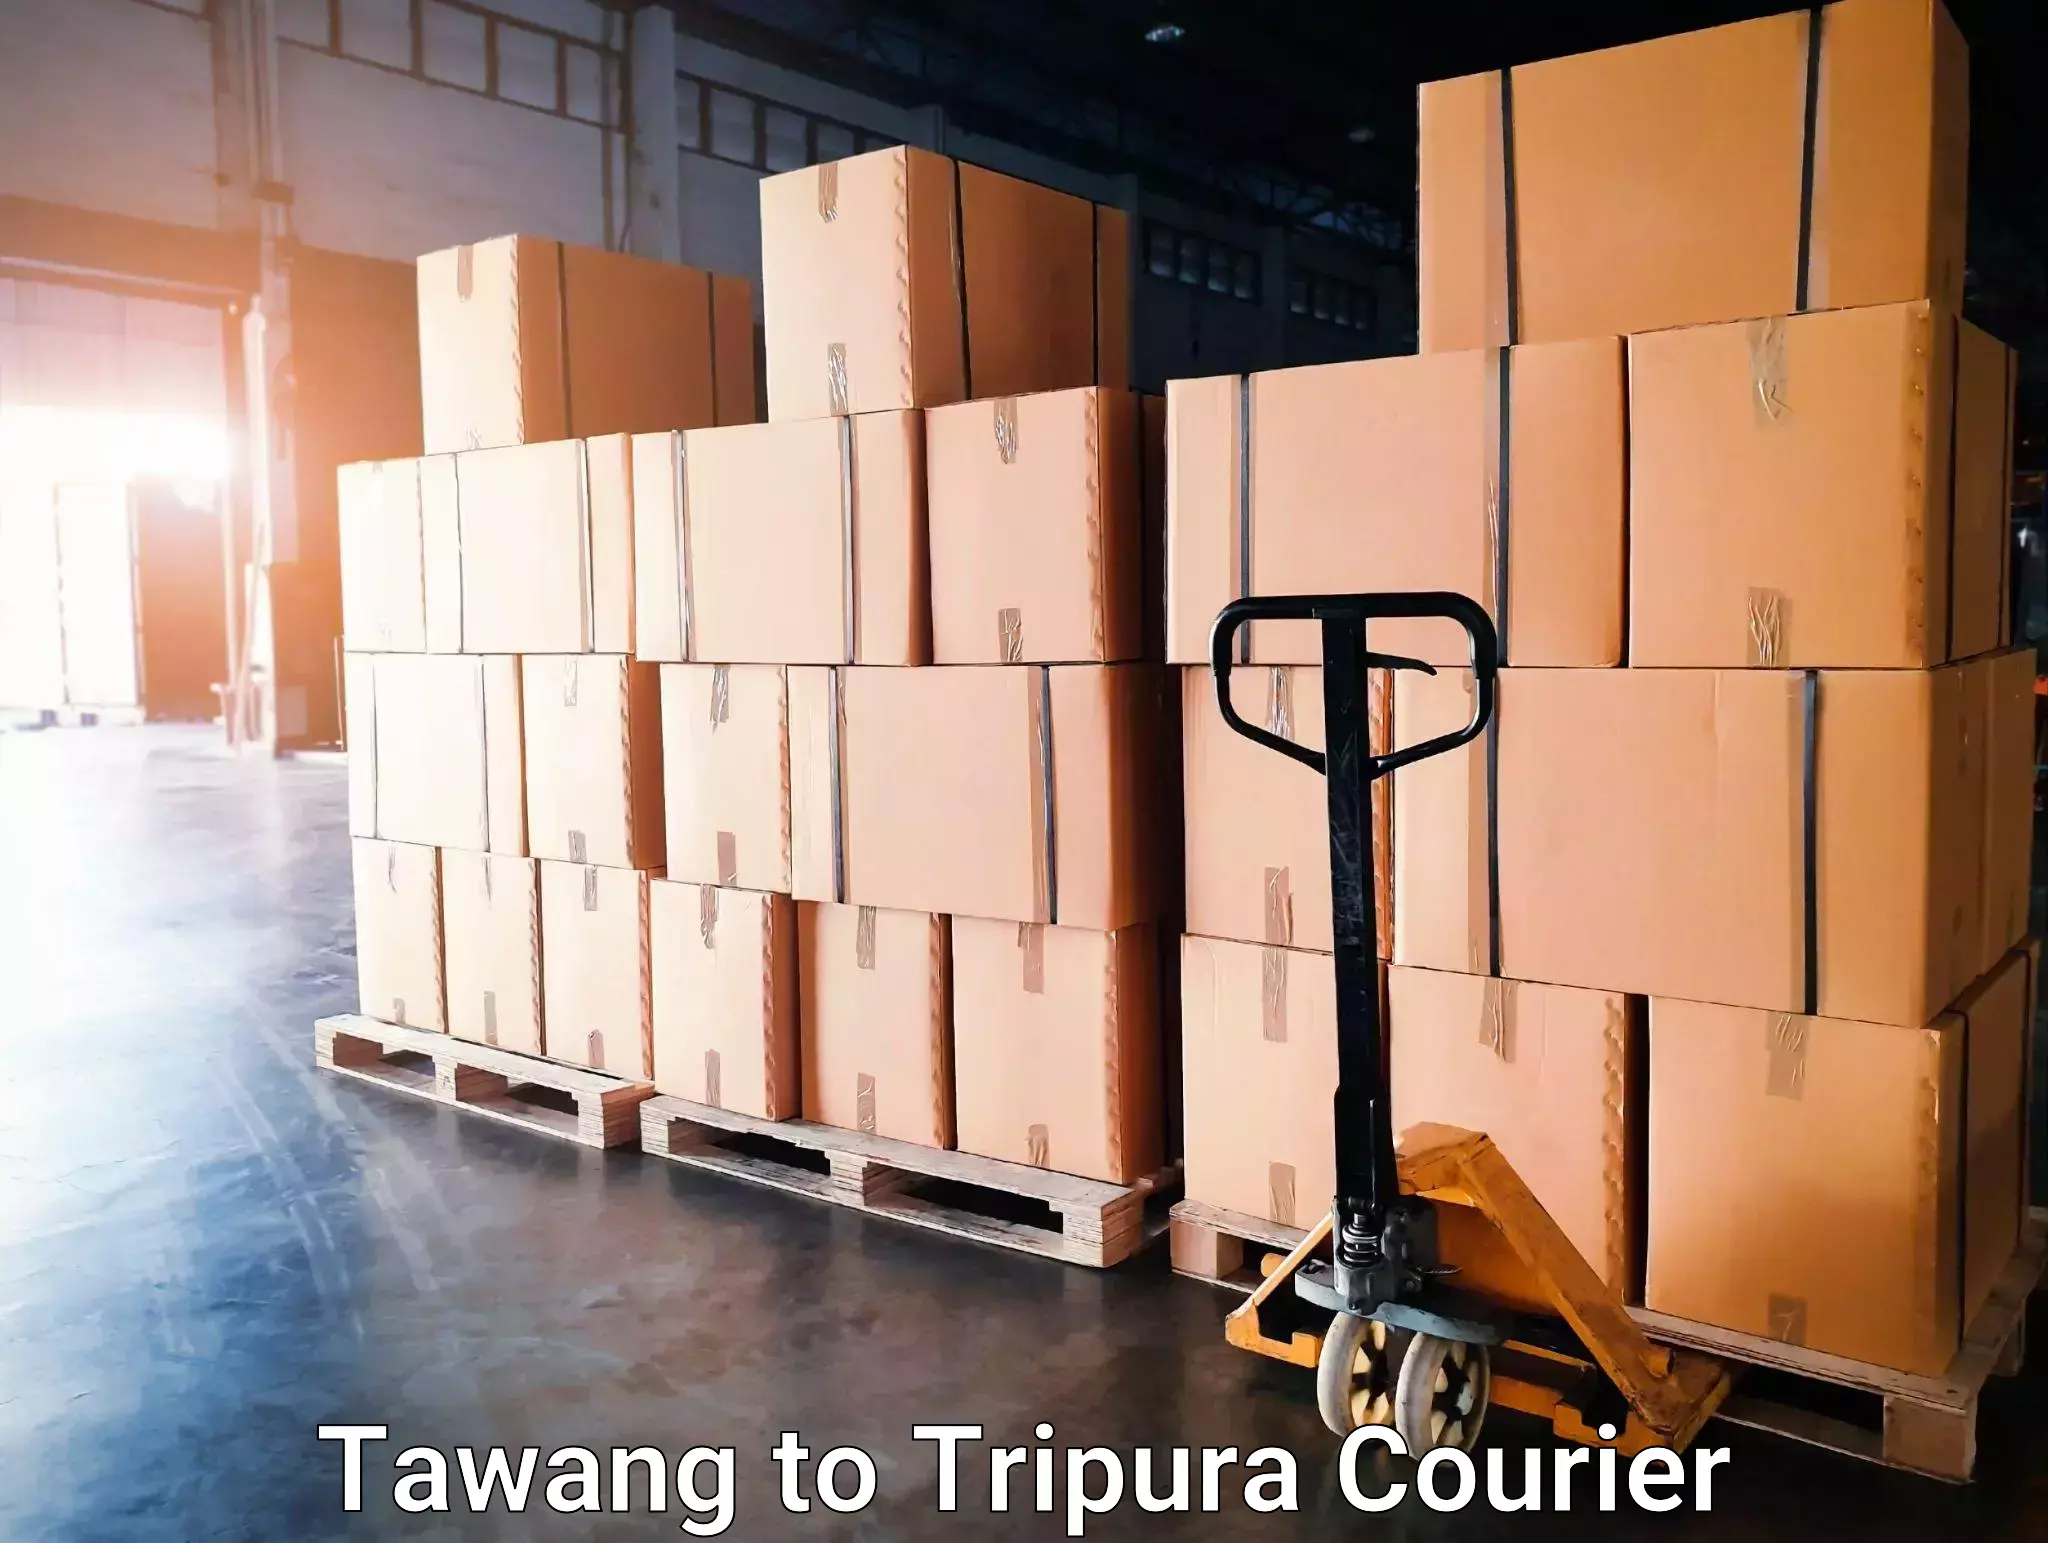 Courier service comparison Tawang to Udaipur Tripura